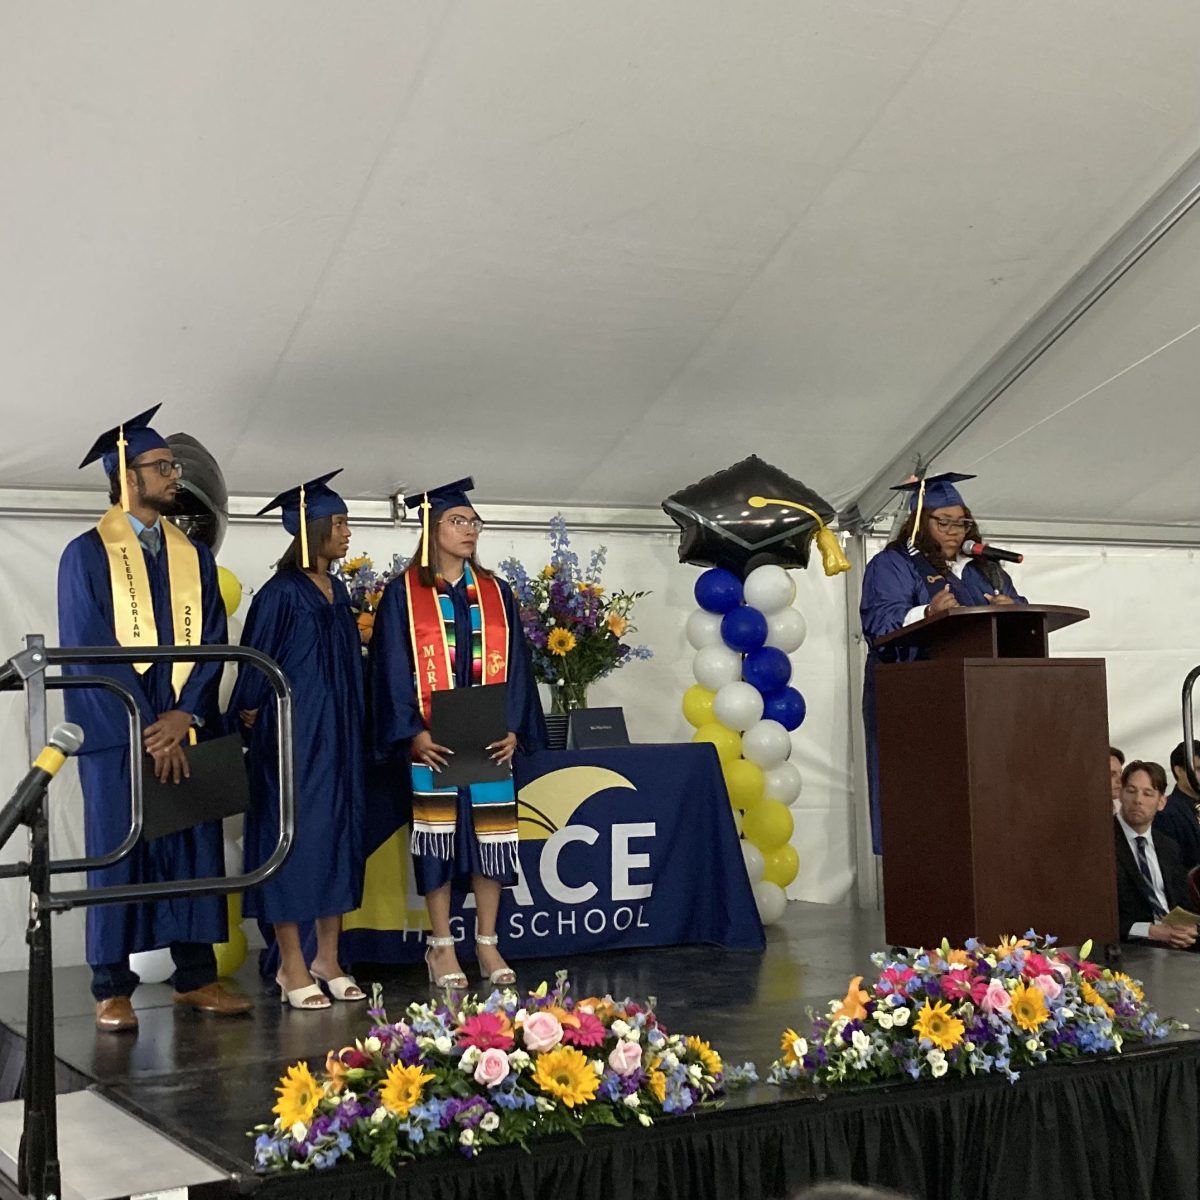 The 2023 graduation ceremony was held in two shifts in a tent set up in the yard next to the school building.